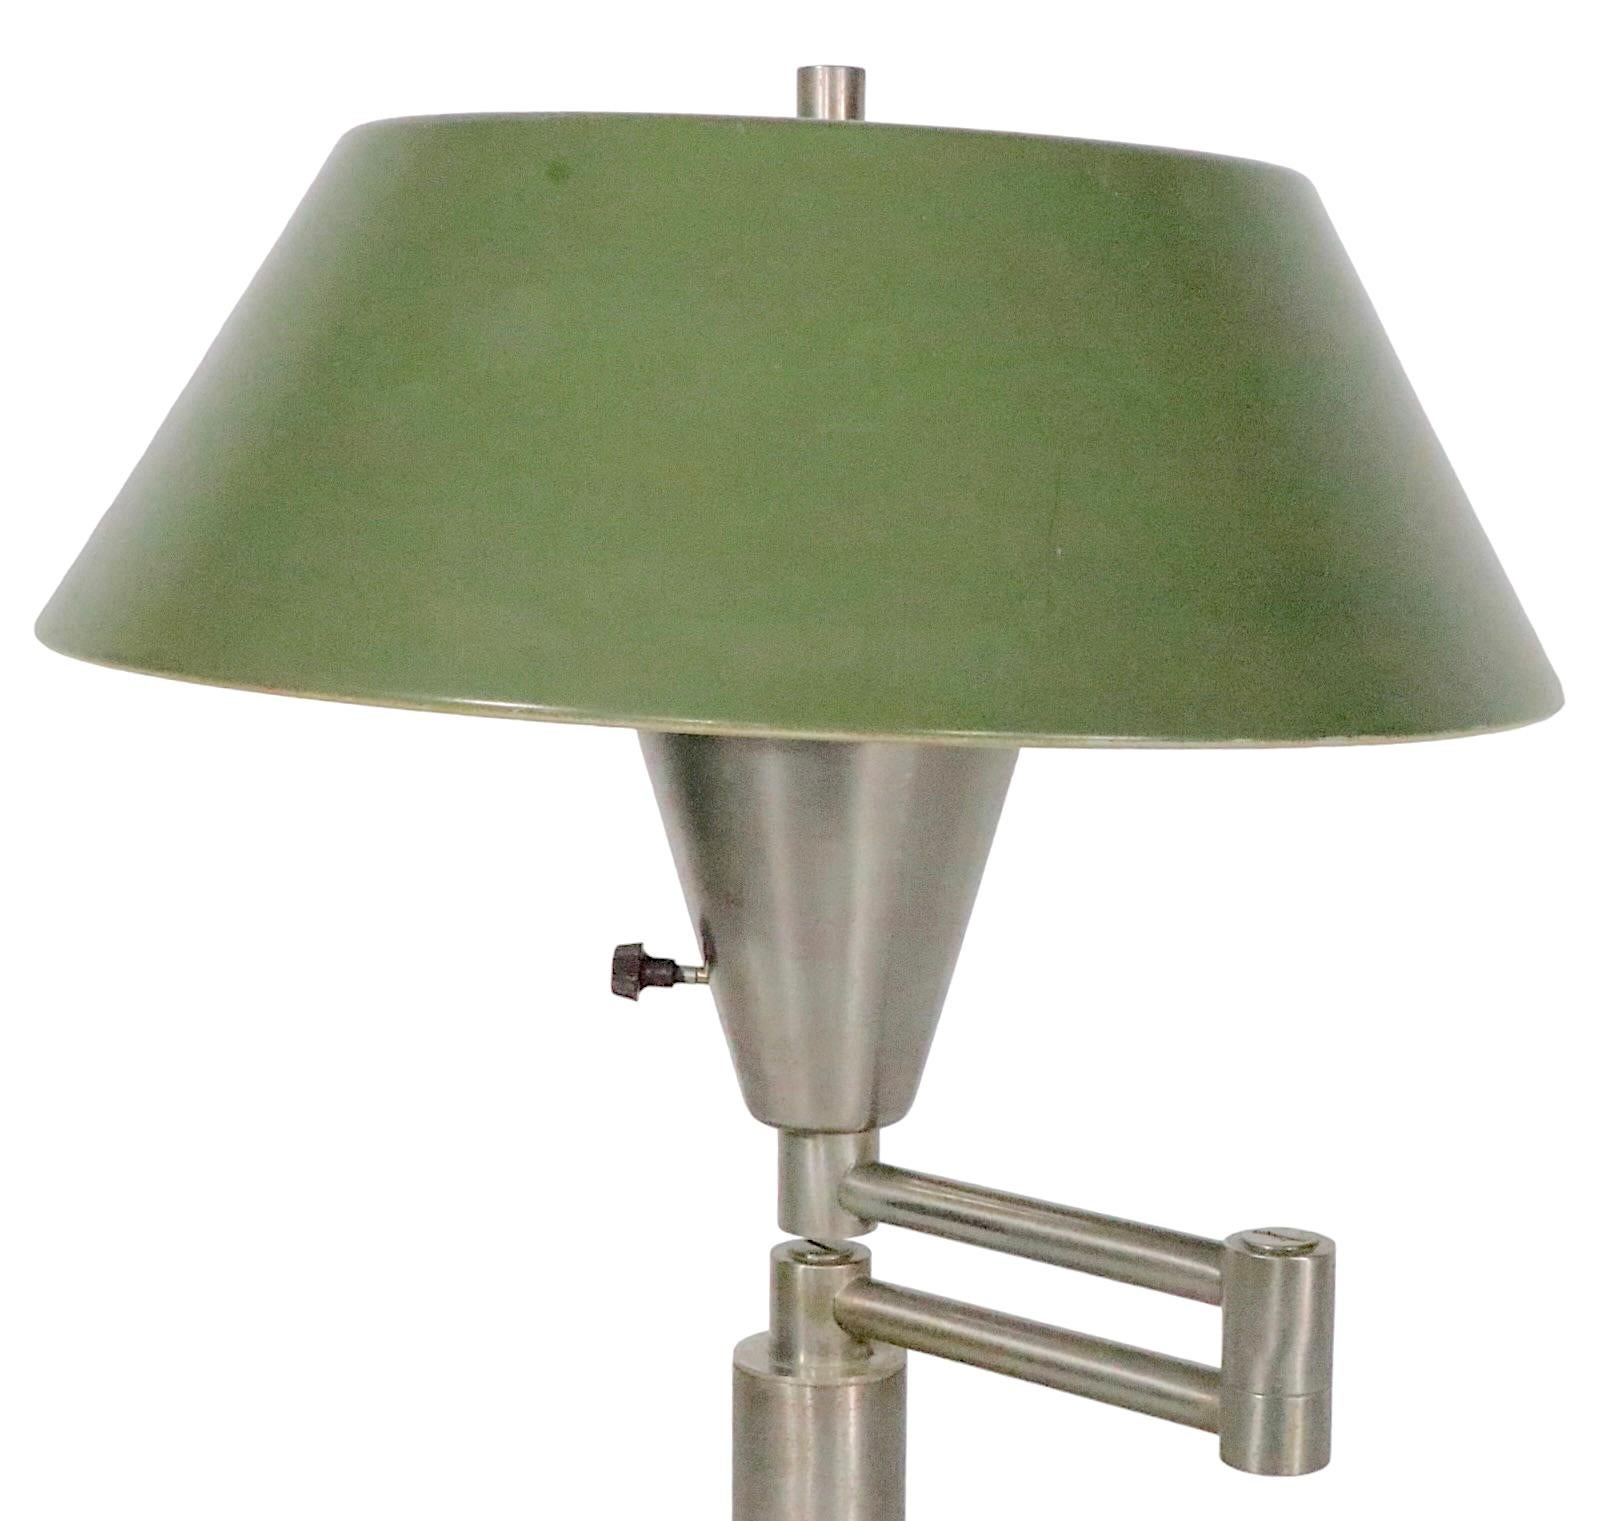 Iconic Walter Von Nessen Swing Arm Desk Lamp with Original Metal Shade In Good Condition For Sale In New York, NY